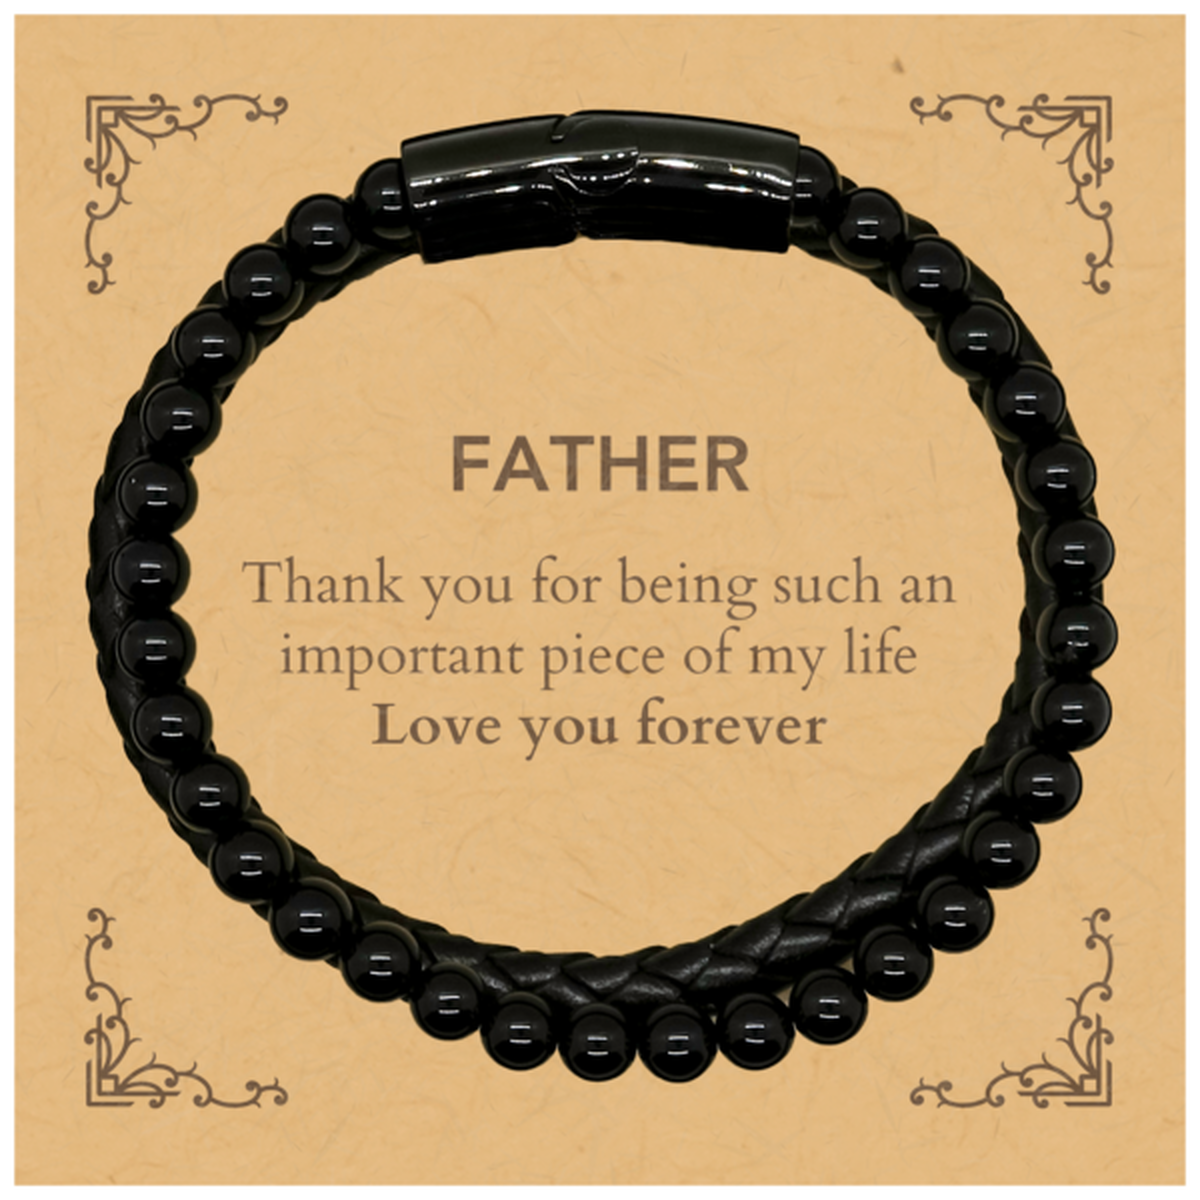 Appropriate Father Stone Leather Bracelets Epic Birthday Gifts for Father Thank you for being such an important piece of my life Father Christmas Mothers Fathers Day